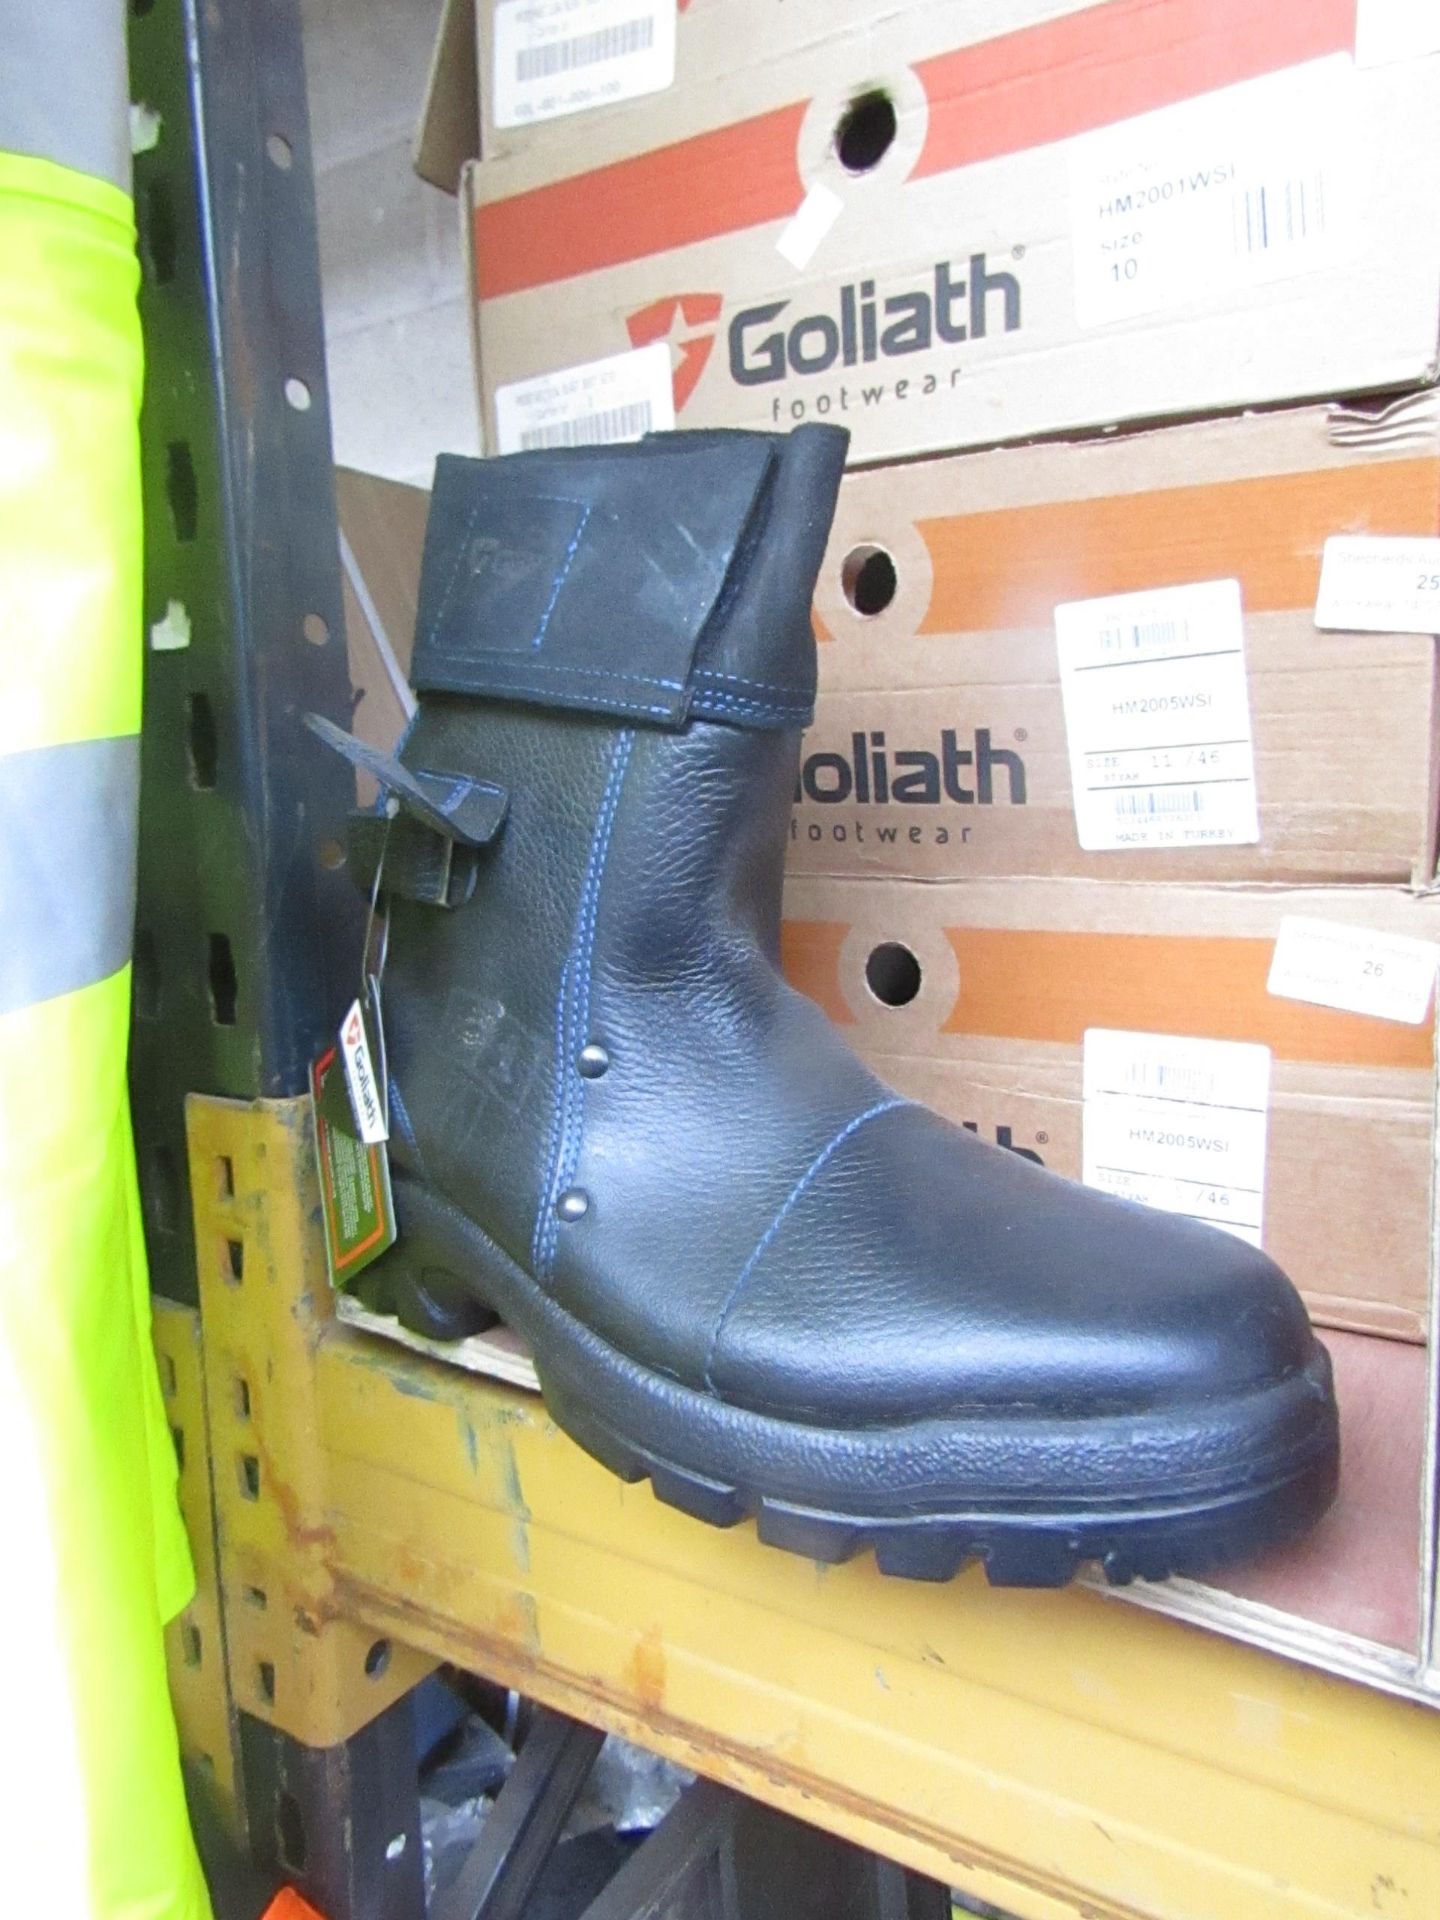 Goliath Foundry Steel Toe Cap Ankle Boot new features include oil resistant, heat resistant, slip